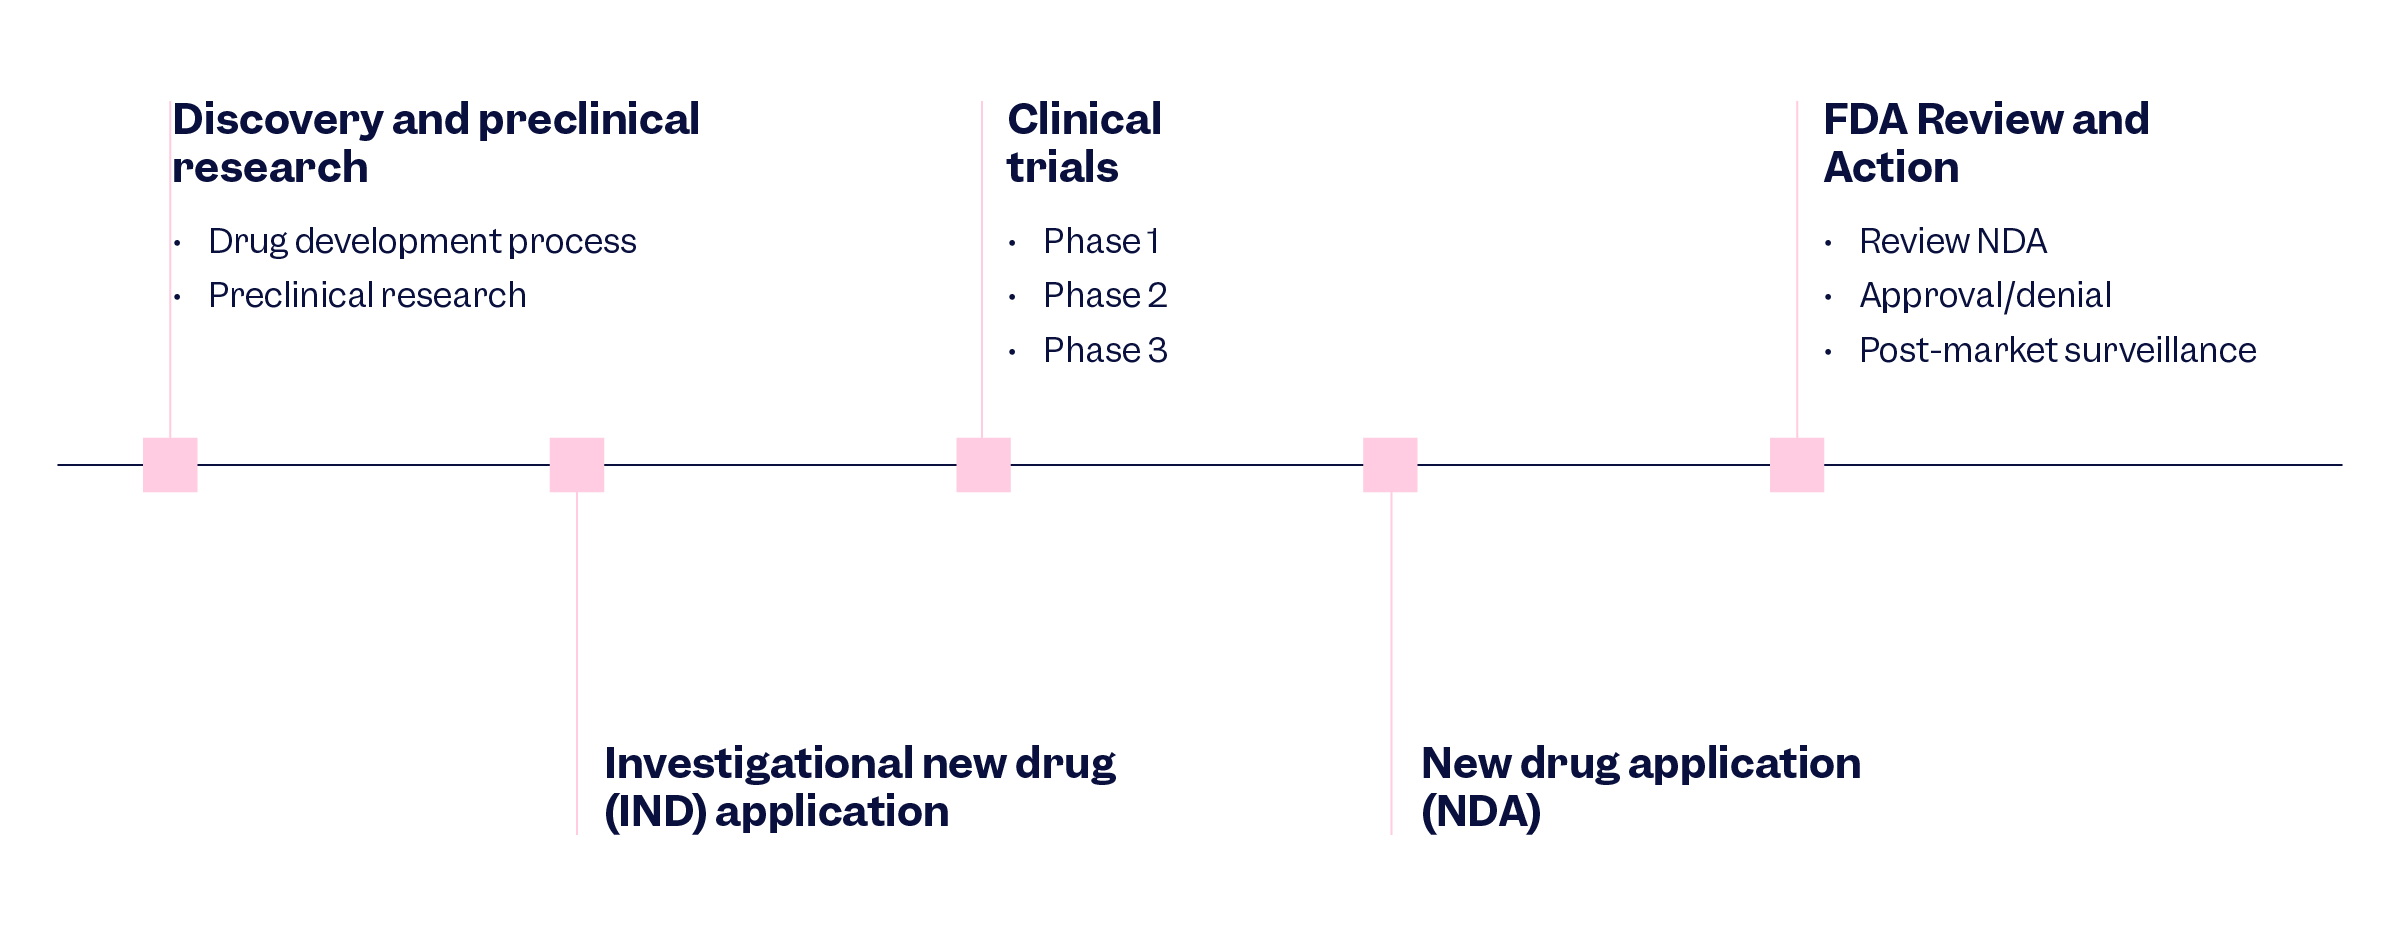 Infographic that shows the New Drug Application (NDA) Process | Scilife